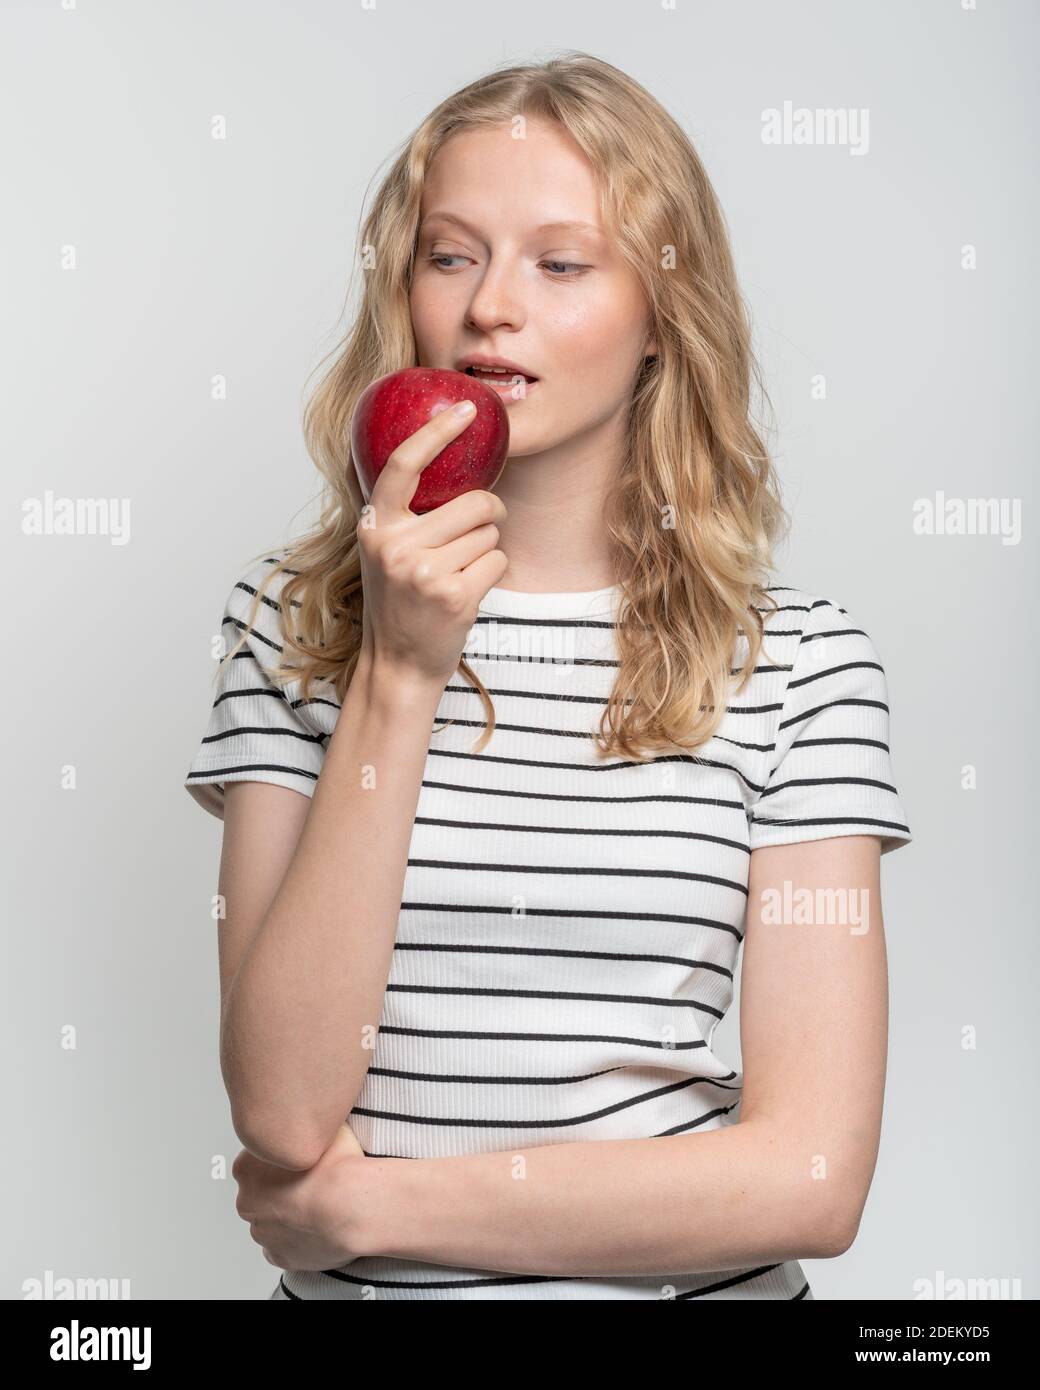 Portrait of young smiling woman bitting red apple. Fresh face, natural beauty Stock Photo